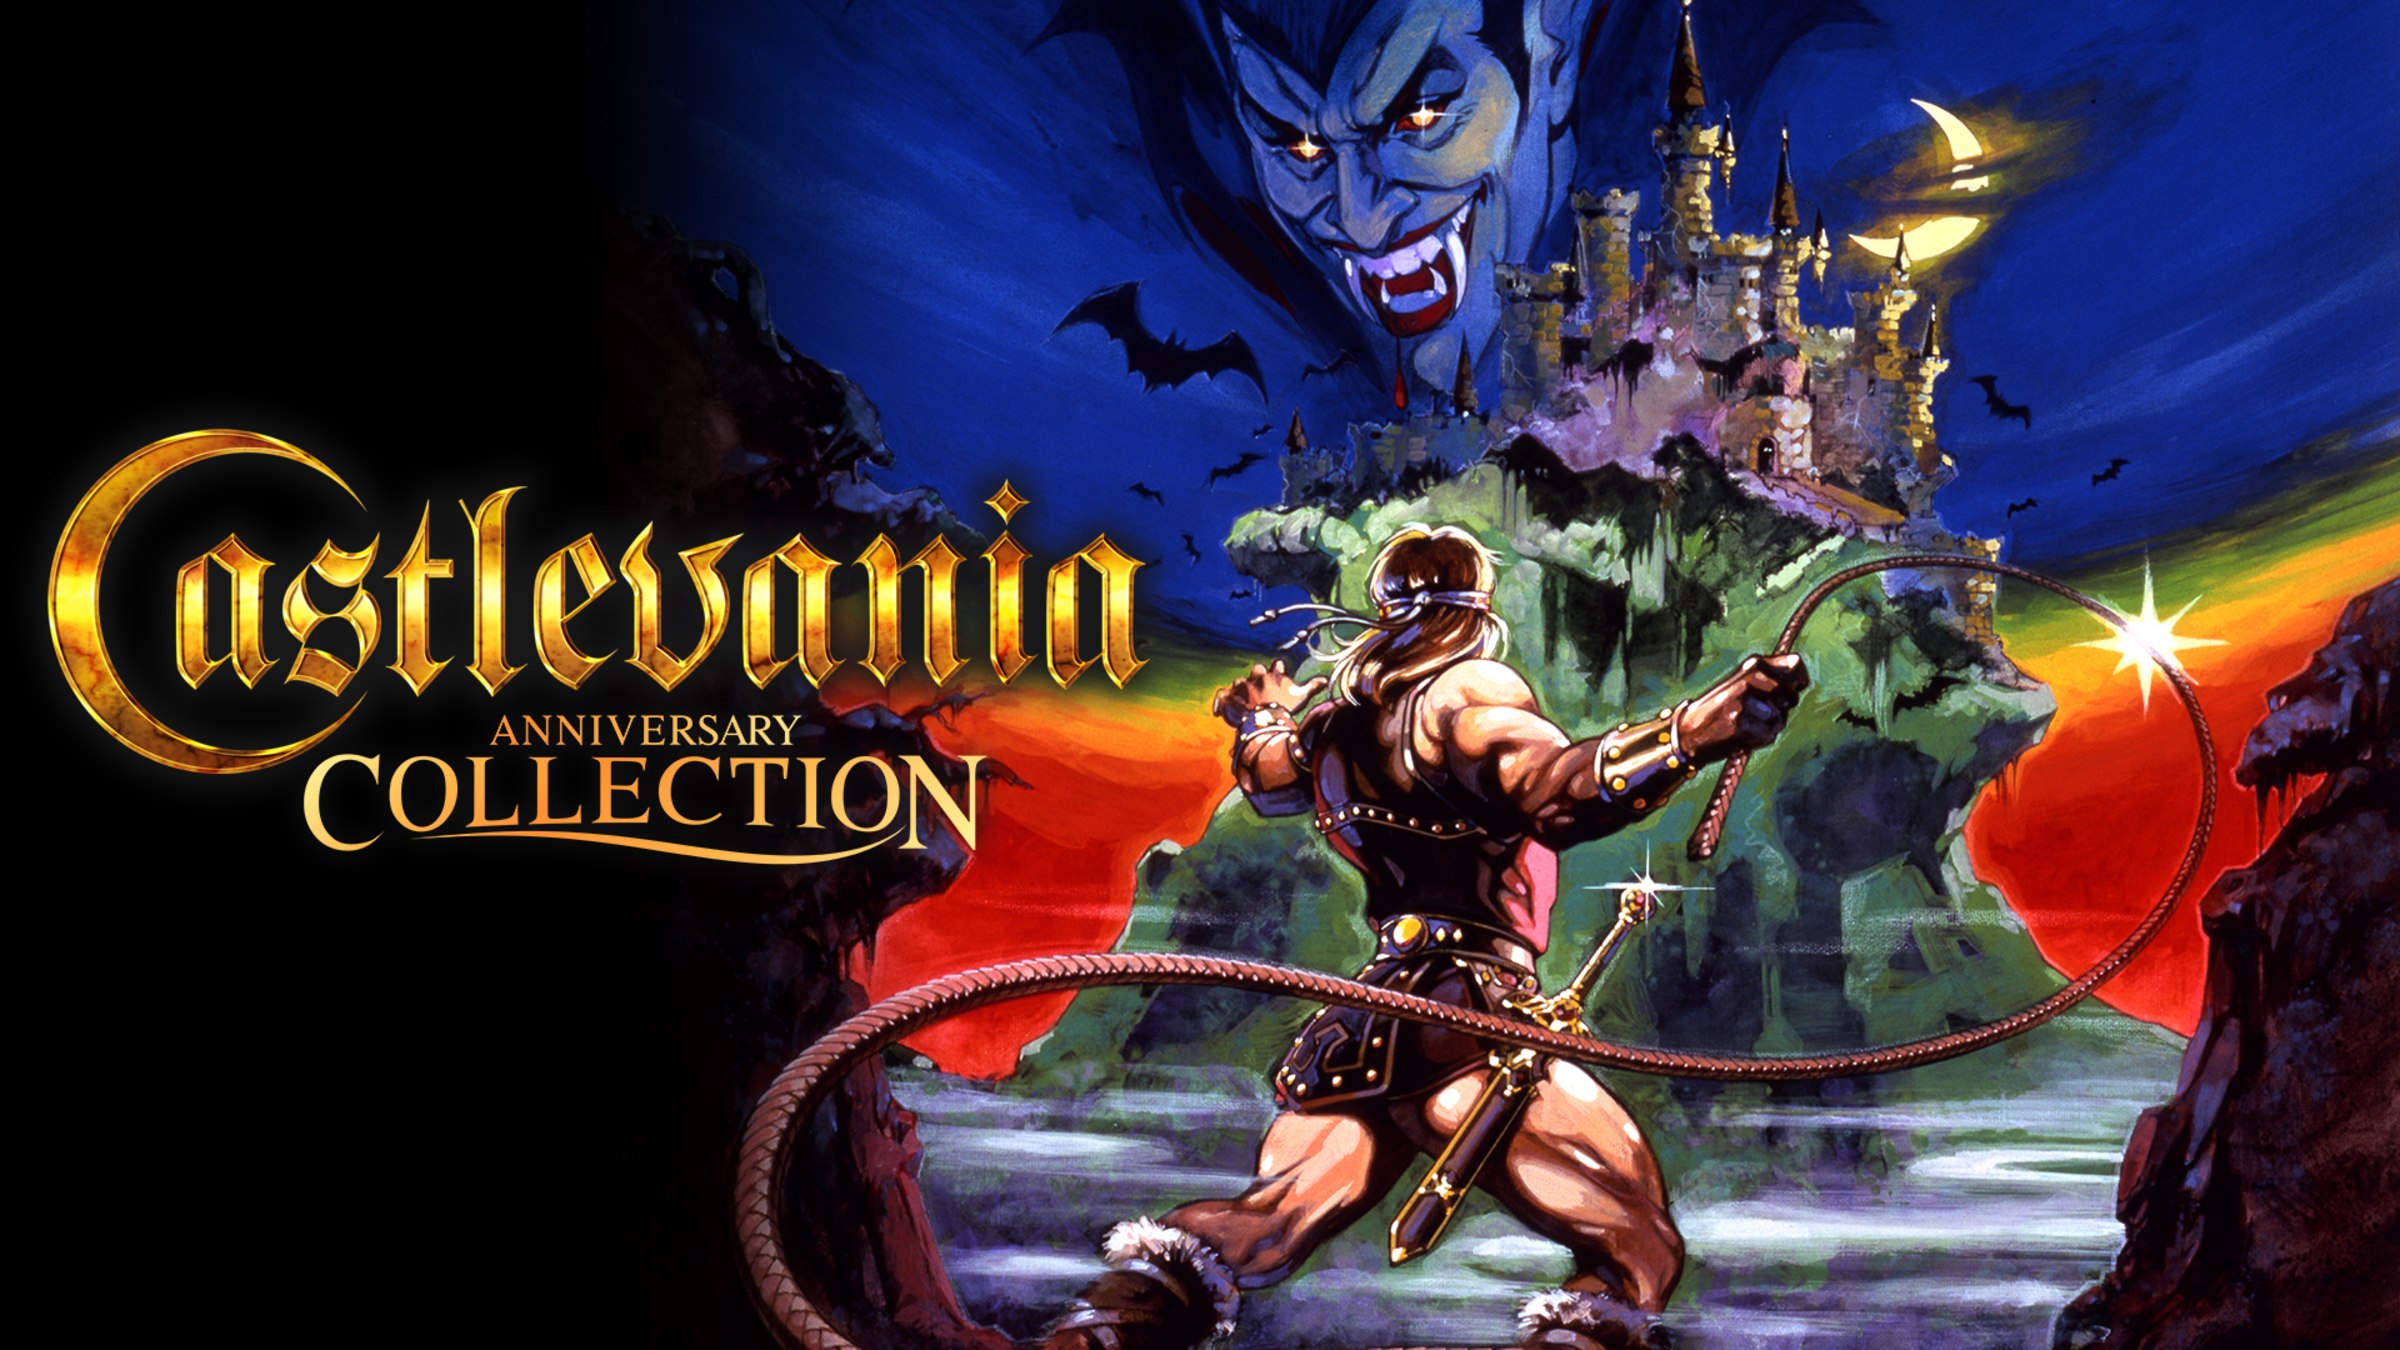 Classic games collection. Castlevania Anniversary collection. Игра Castlevania Anniversary collection. Игра на Нинтендо Castlevania. Castlevania Advance collection Switch.